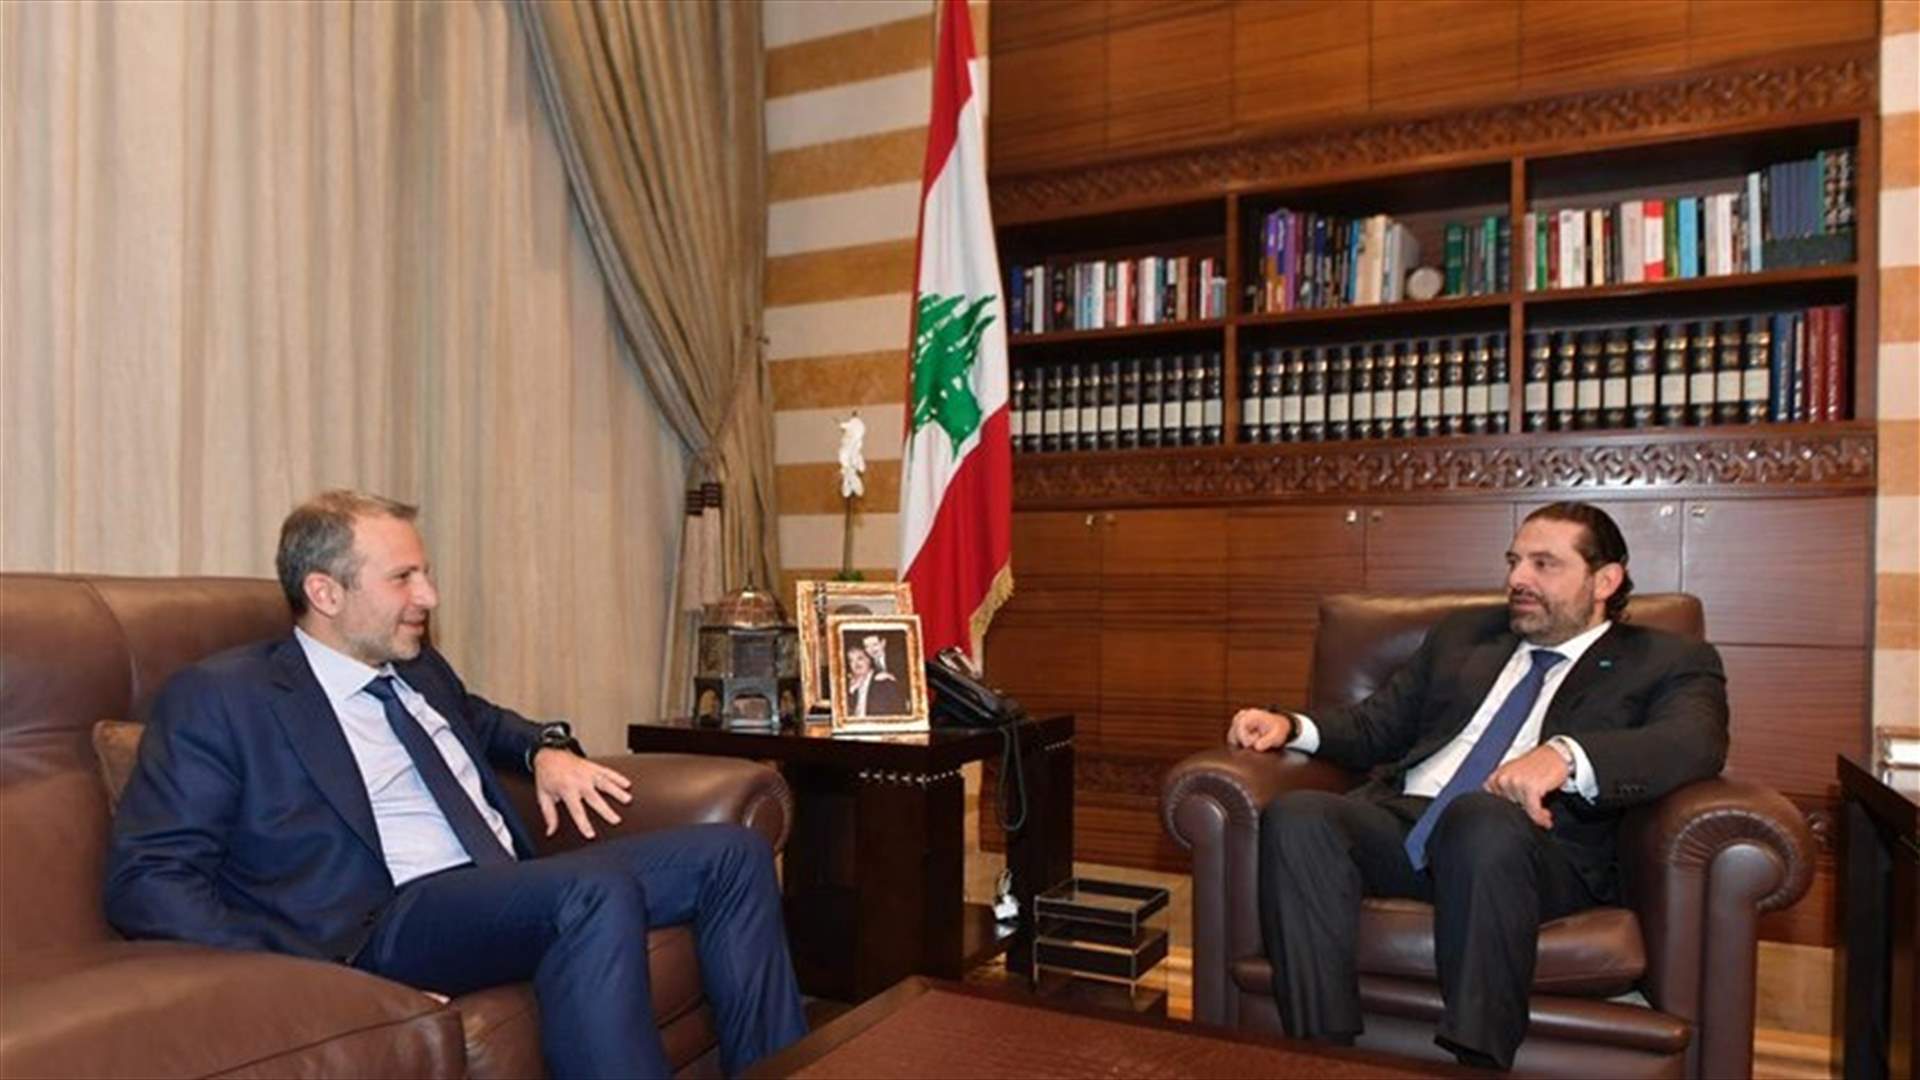 Hariri, Bassil discuss cabinet formation during meeting at Beit al-Wasat